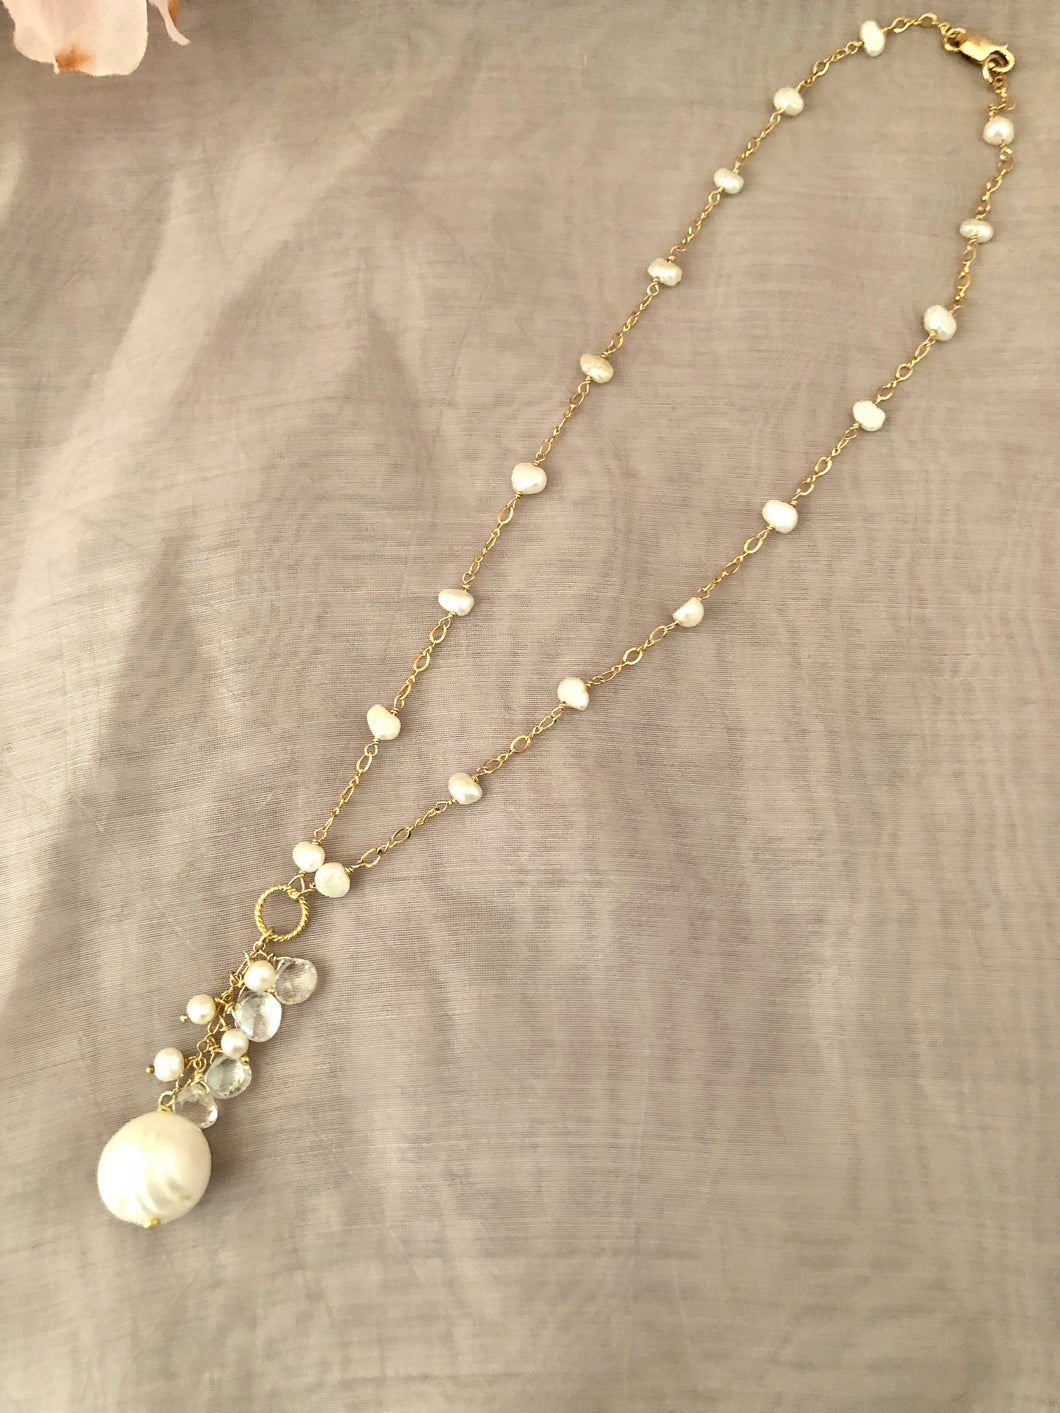 Freshwater Pearl and White Topaz Bridal Necklace in 14K Gold Fill